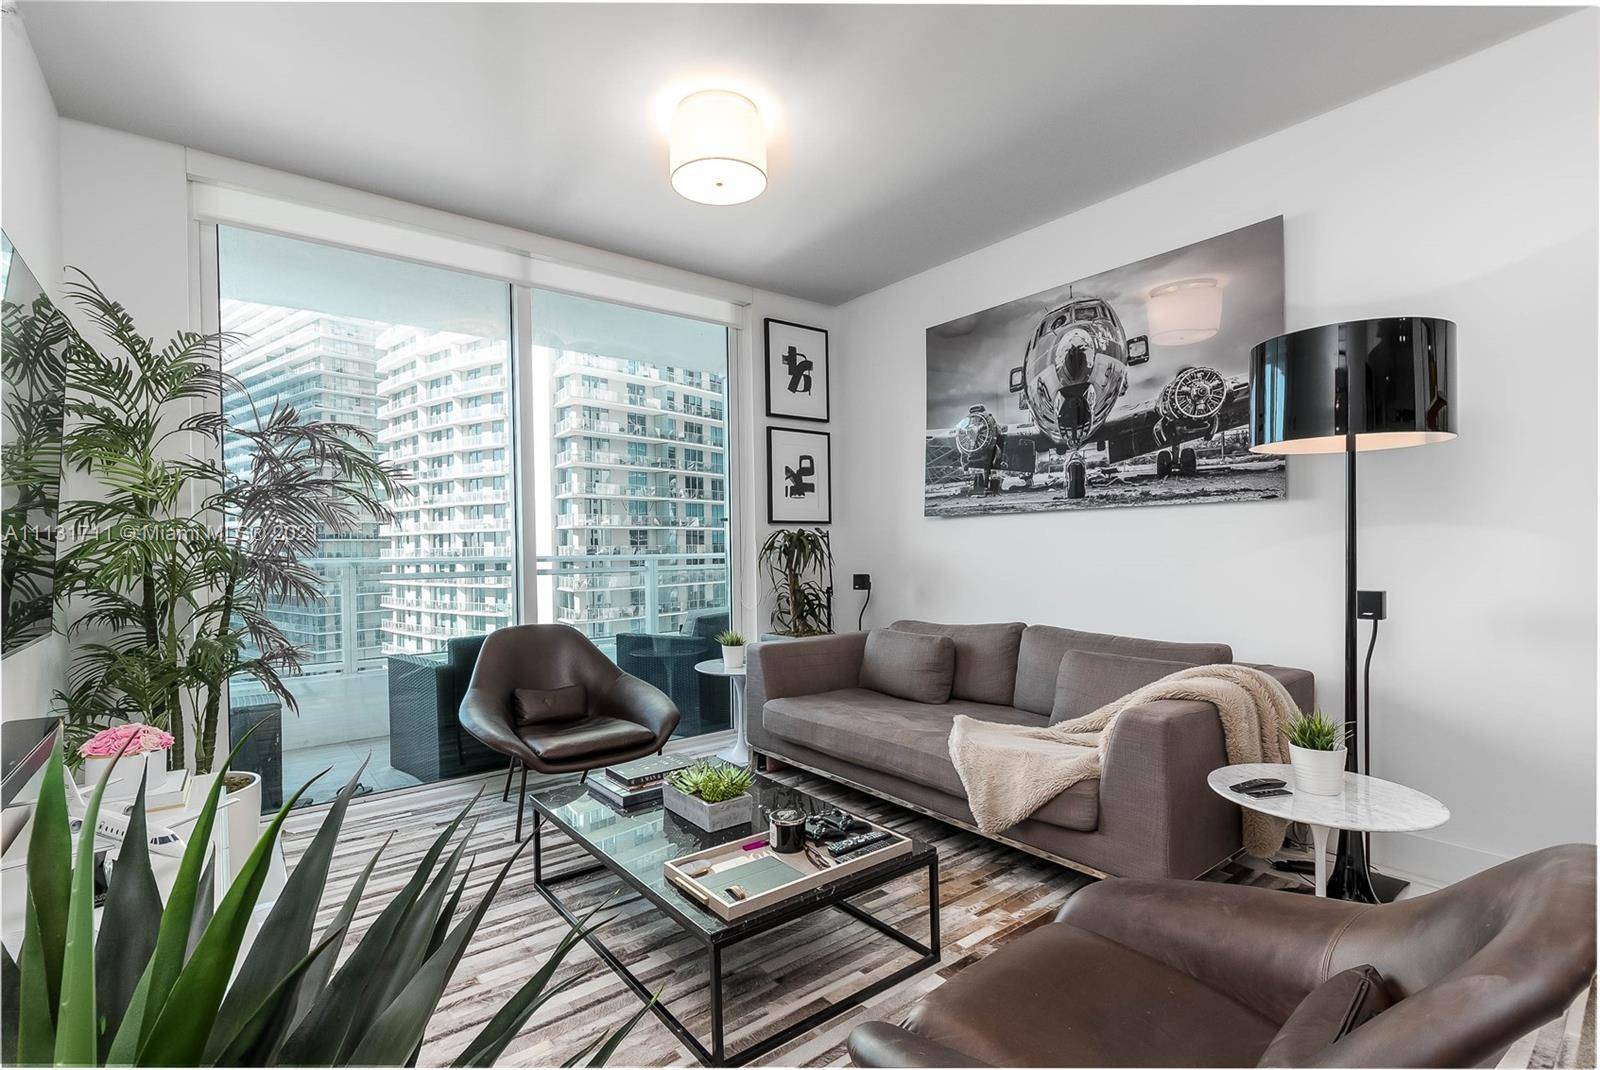 A beautiful one bedroom unit with city and sunset views to the West with 9 foot ceilings, floor to ceiling windows, and a private terrace.